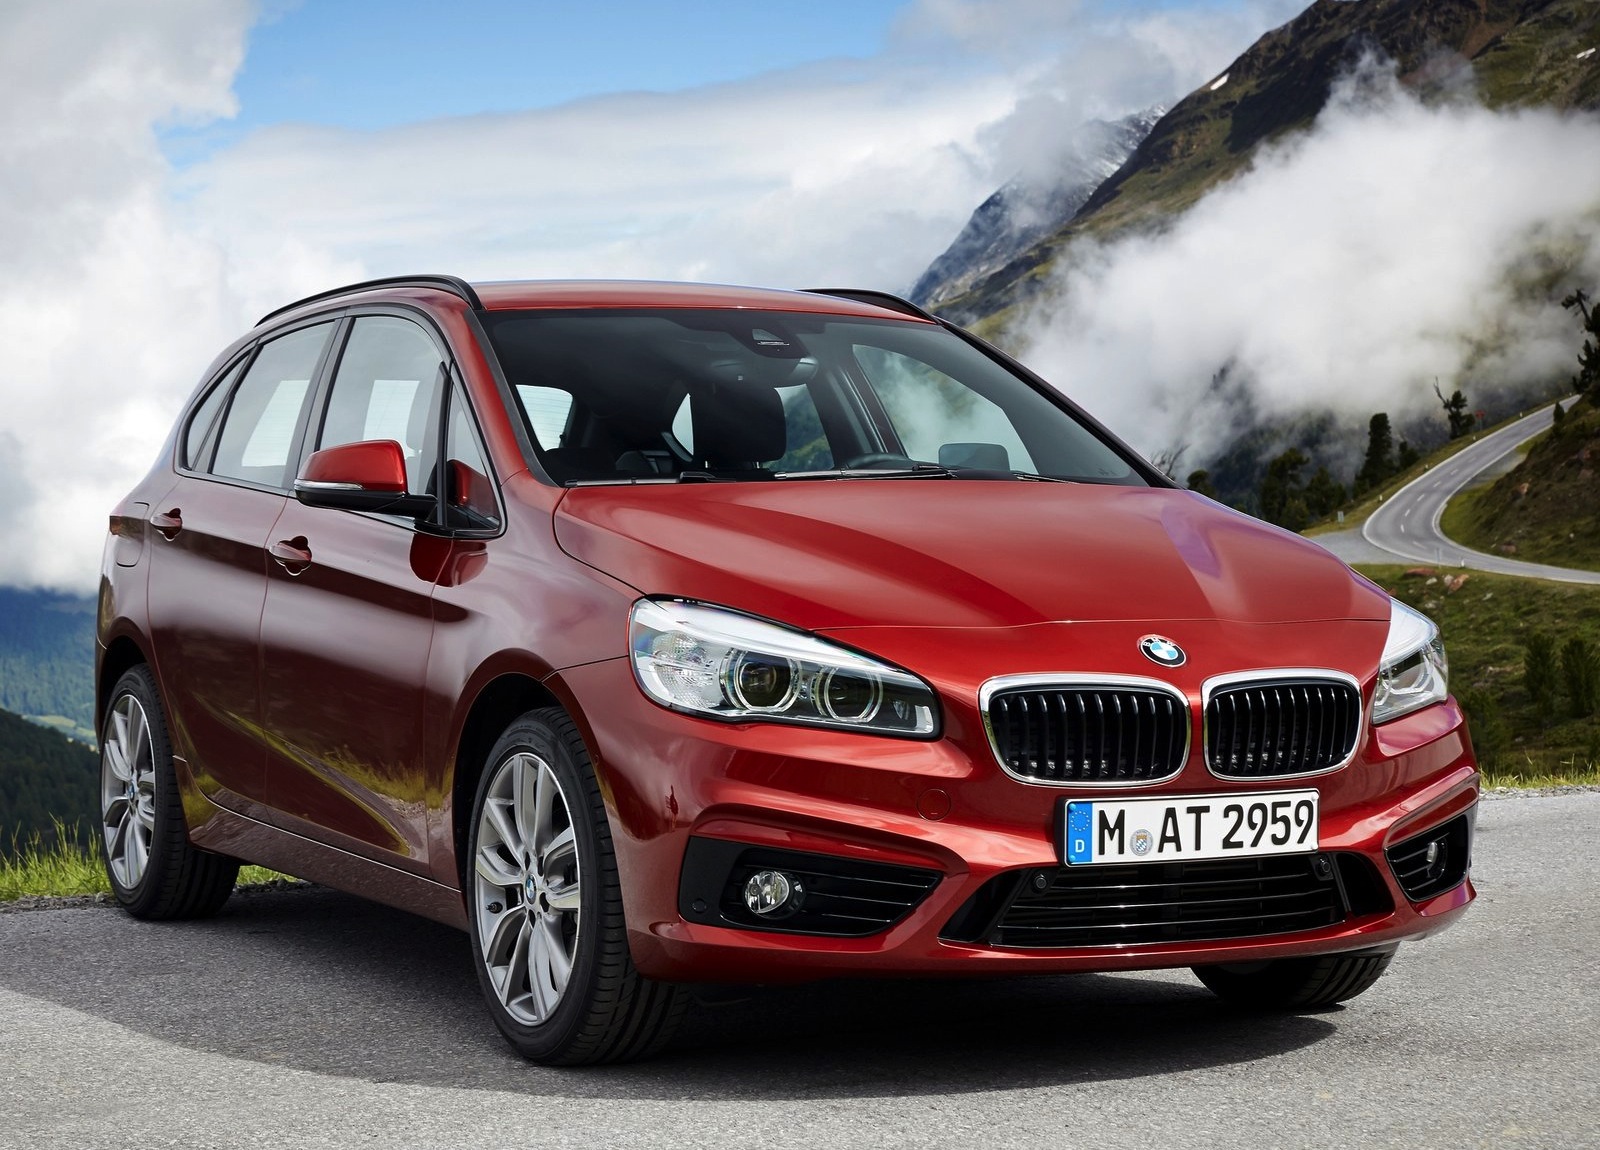 Plugin Hybrid BMW 2 Series Active Tourer to Be Unveiled